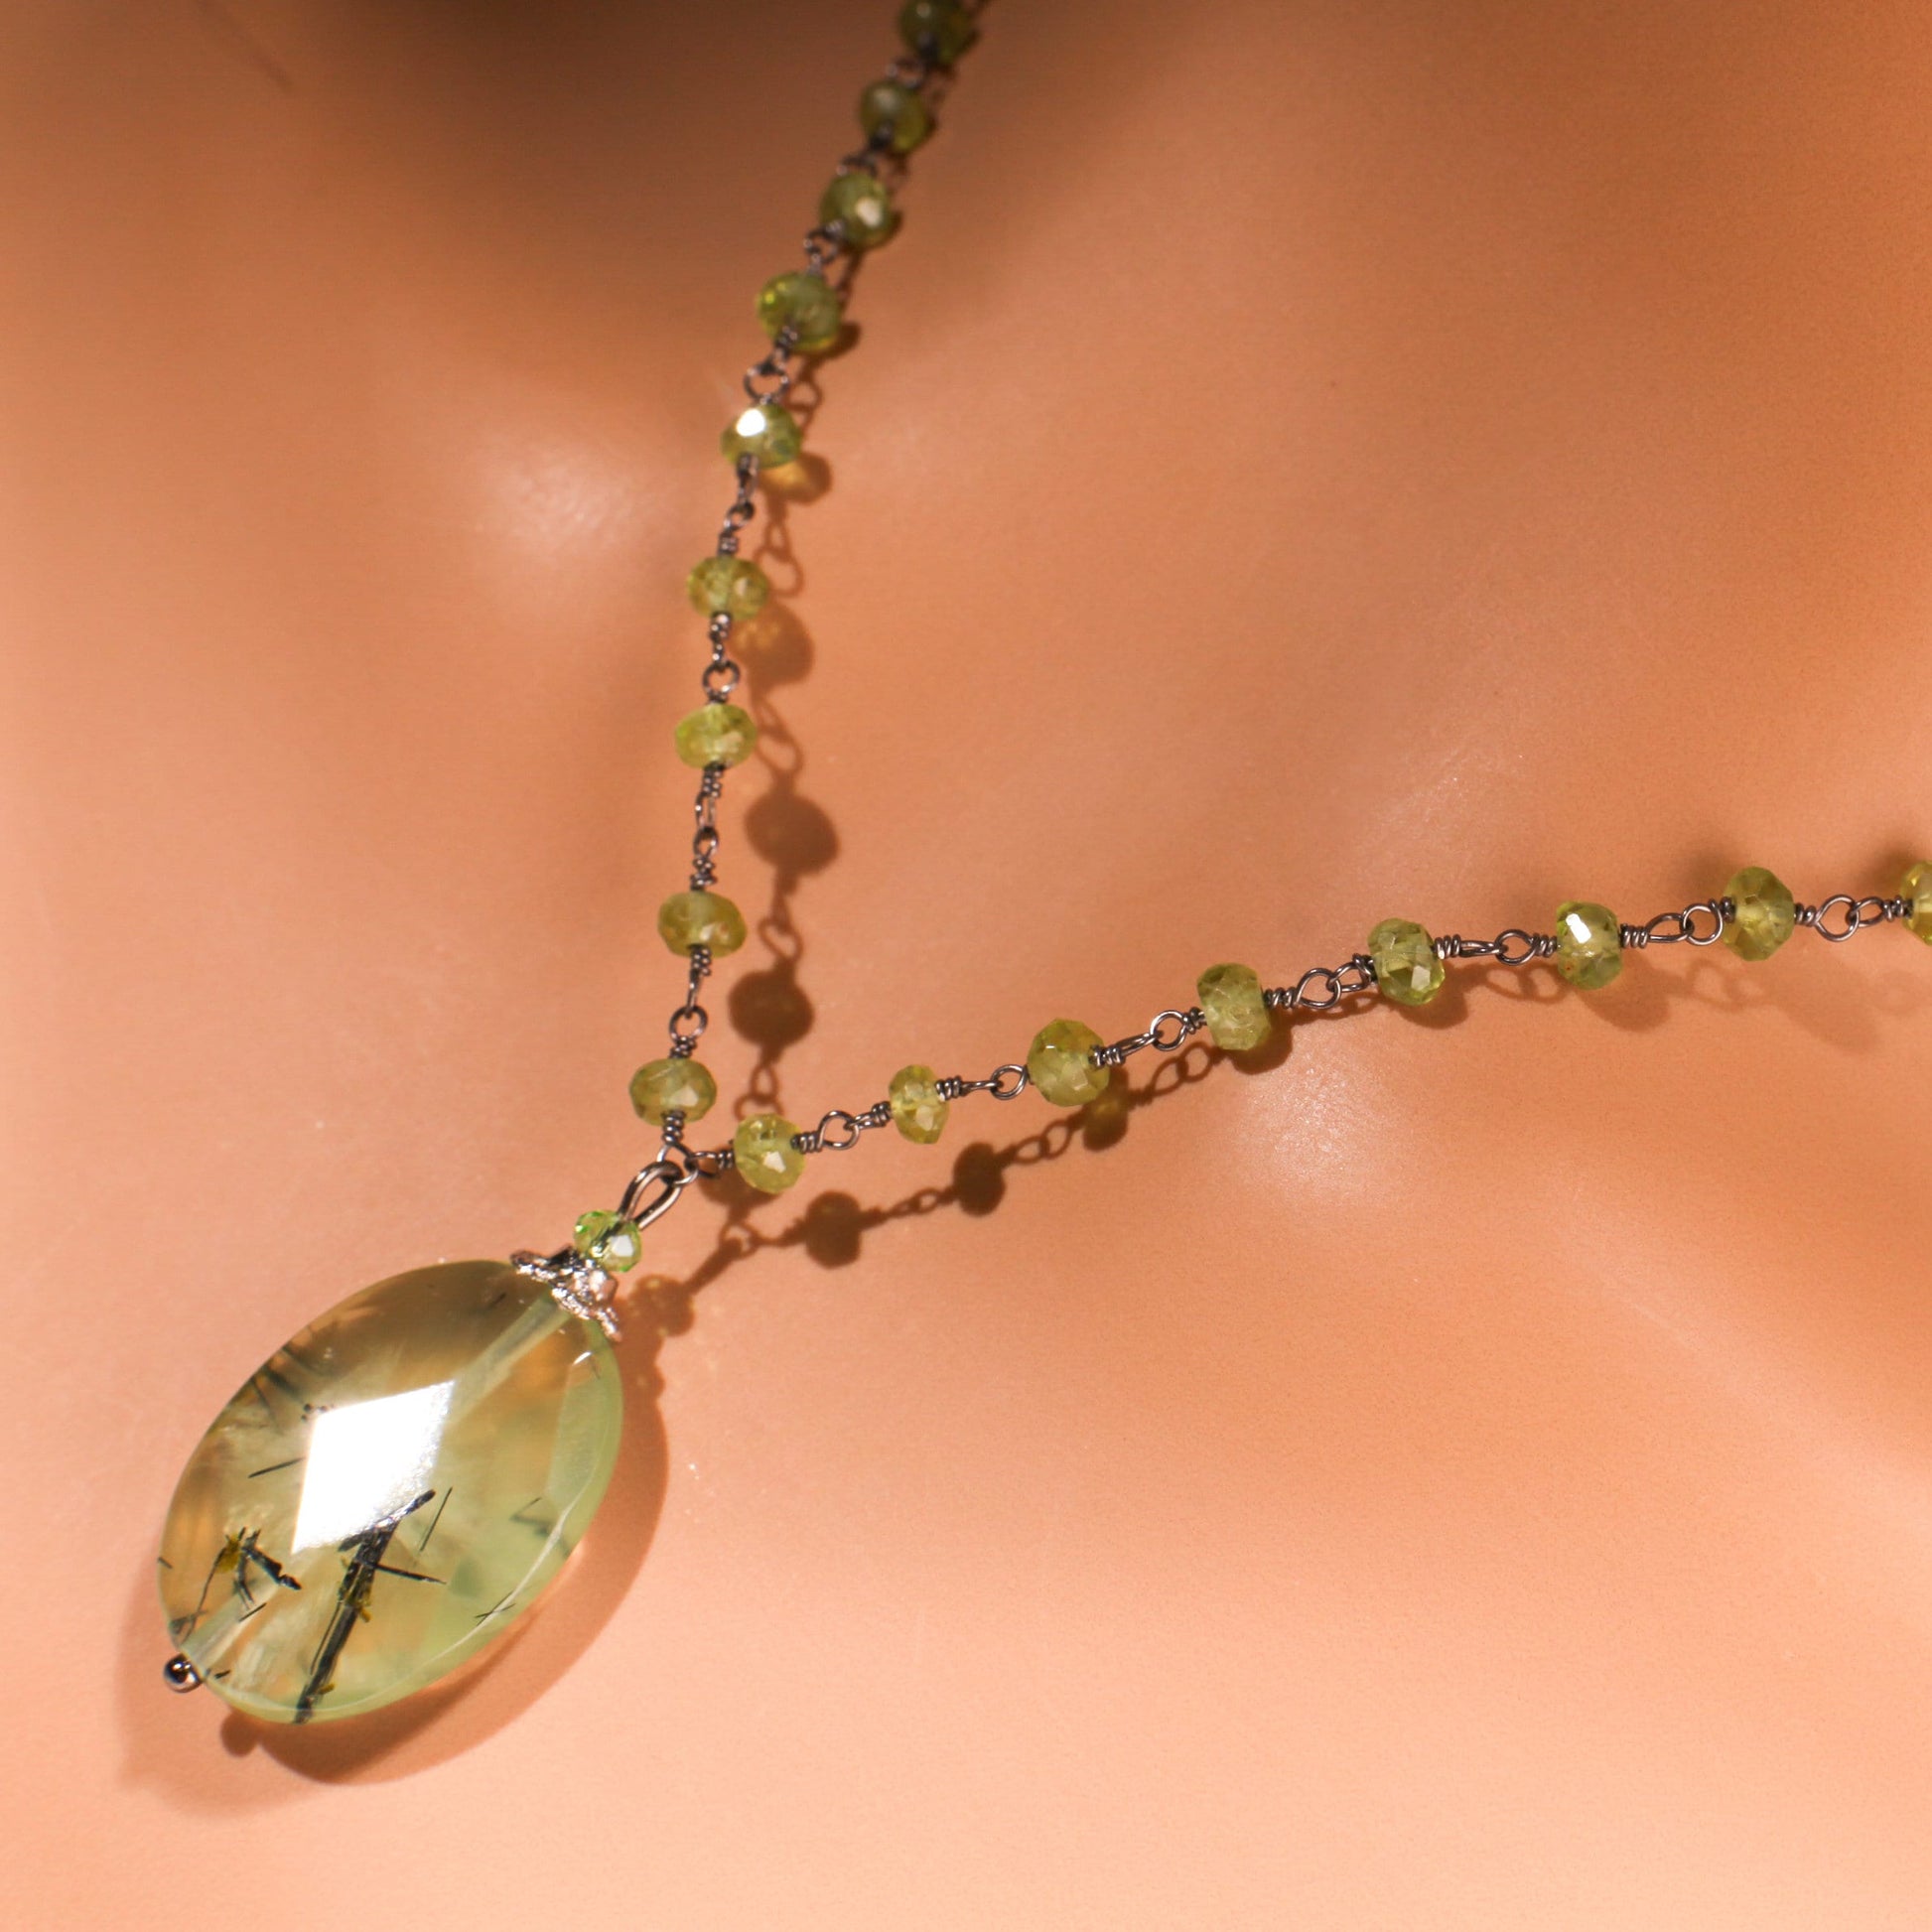 Genuine Prehnite Faceted Oval Pendant 18x26mm, Peridot 4mm Faceted Wire Wrapped Oxidized Silver Rosary Chain Handmade Necklace, 16"- 30"